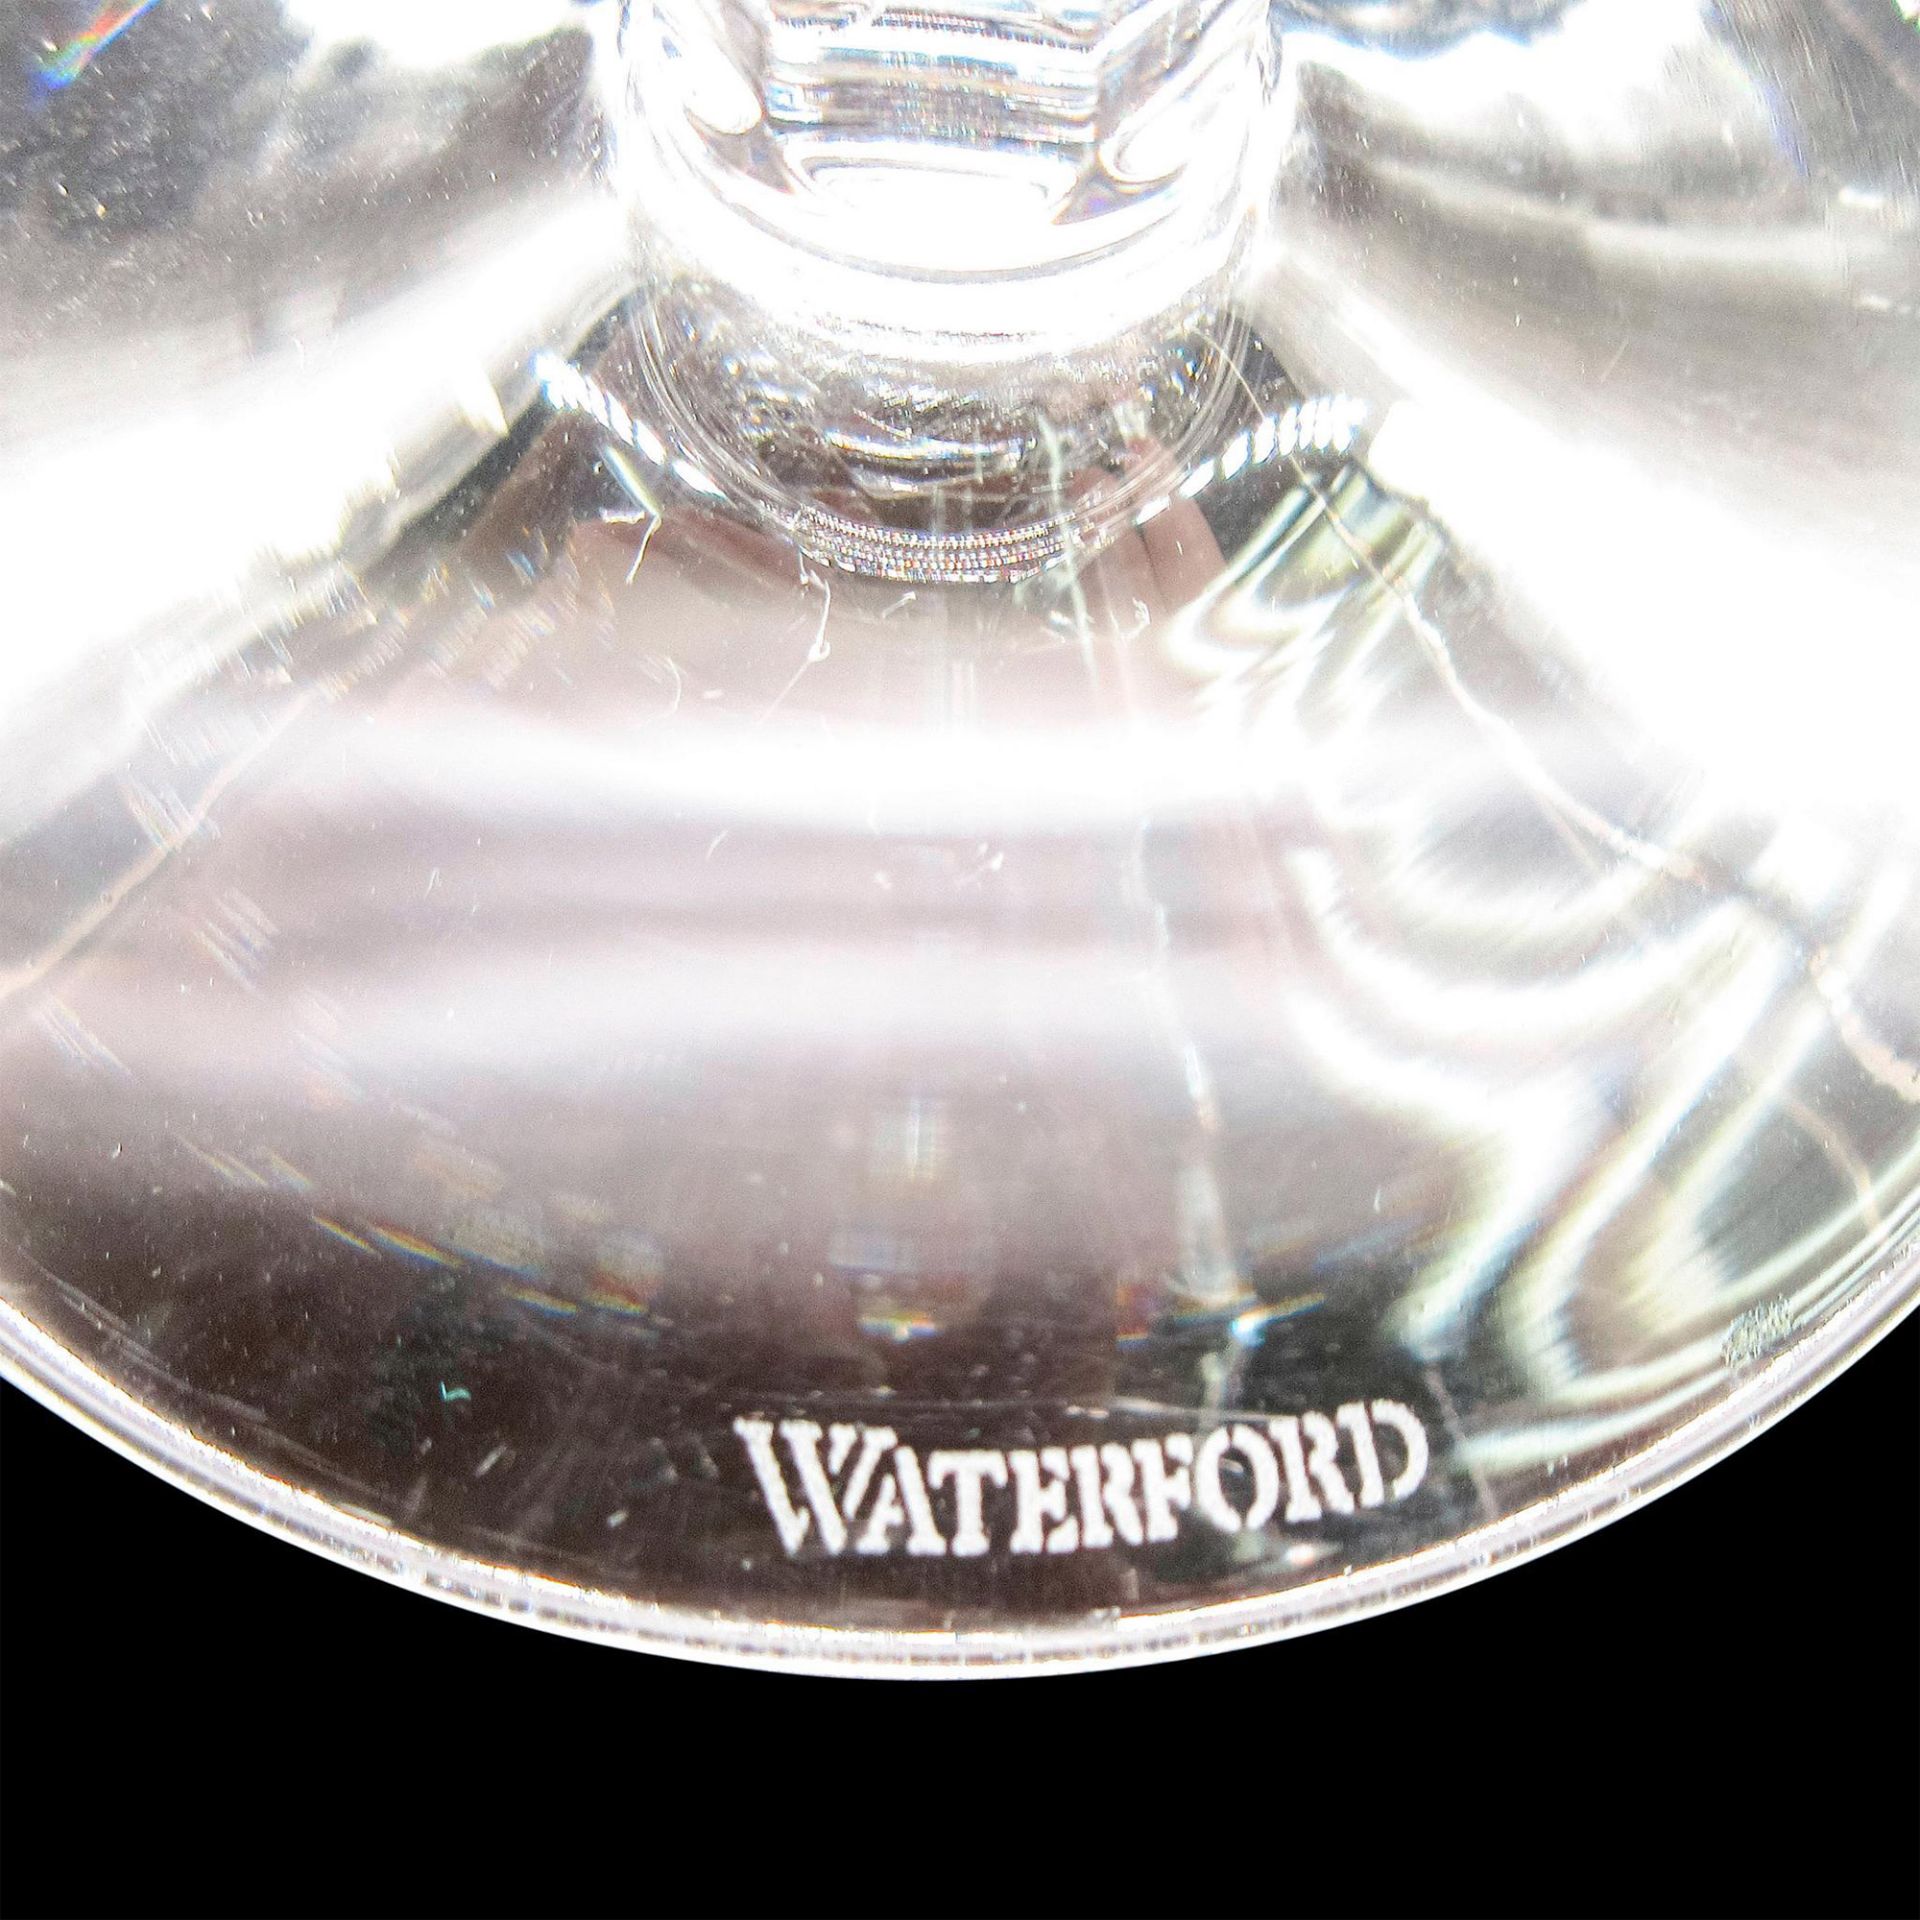 2pc Waterford Crystal Hock Wine Glasses, Sheila - Image 5 of 9